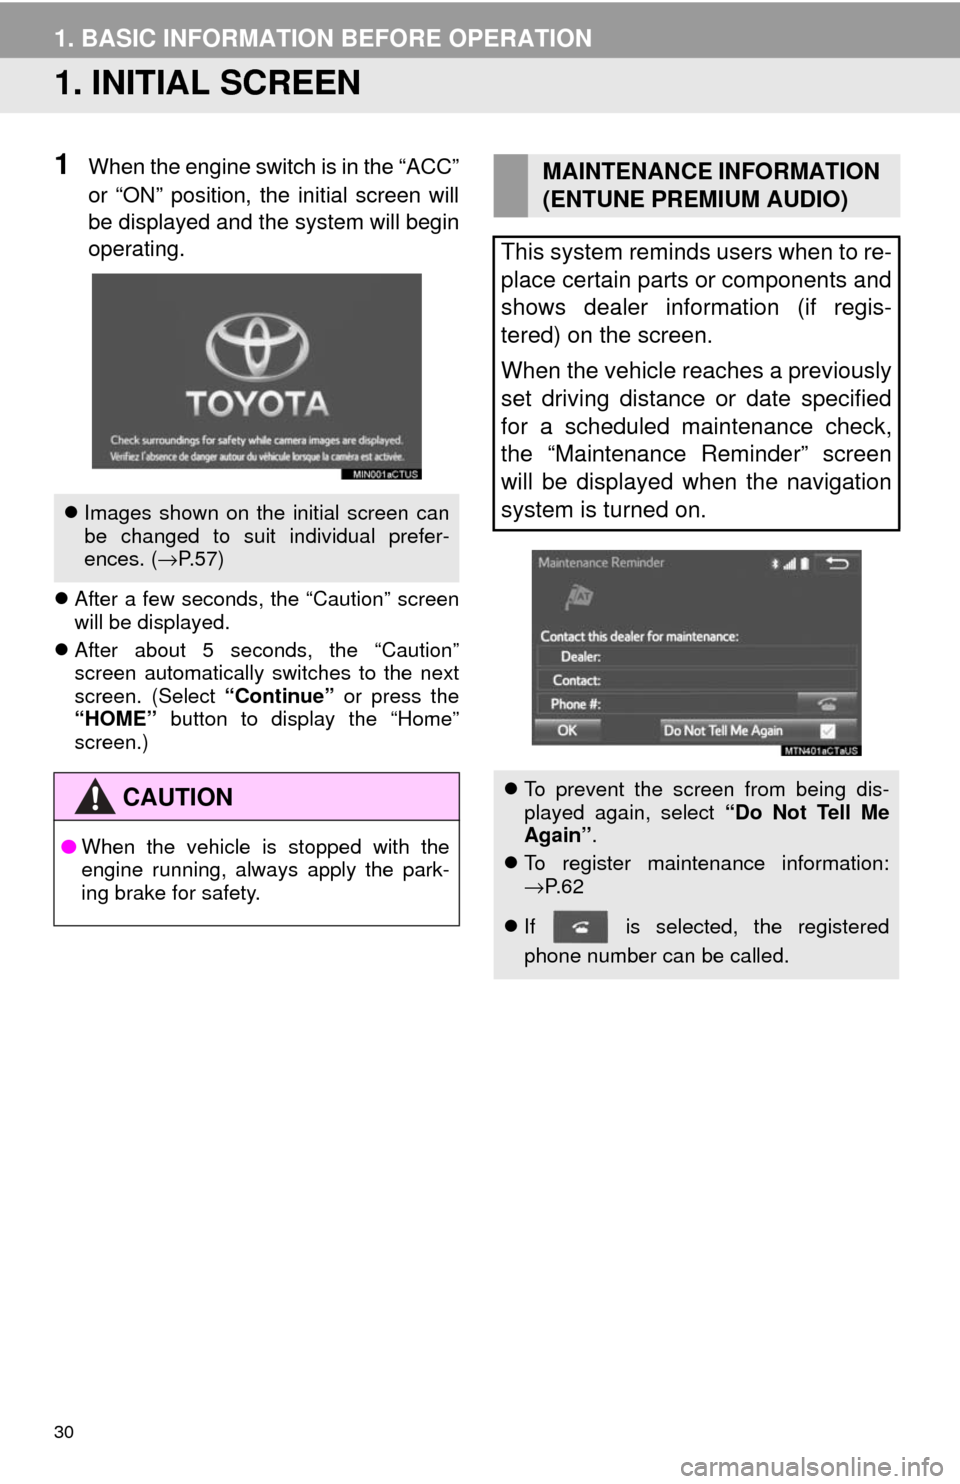 TOYOTA SEQUOIA 2017 2.G Navigation Manual 30
1. BASIC INFORMATION BEFORE OPERATION
1. INITIAL SCREEN
1When the engine switch is in the “ACC”
or “ON” position, the initial screen will
be displayed and the system will begin
operating.
�